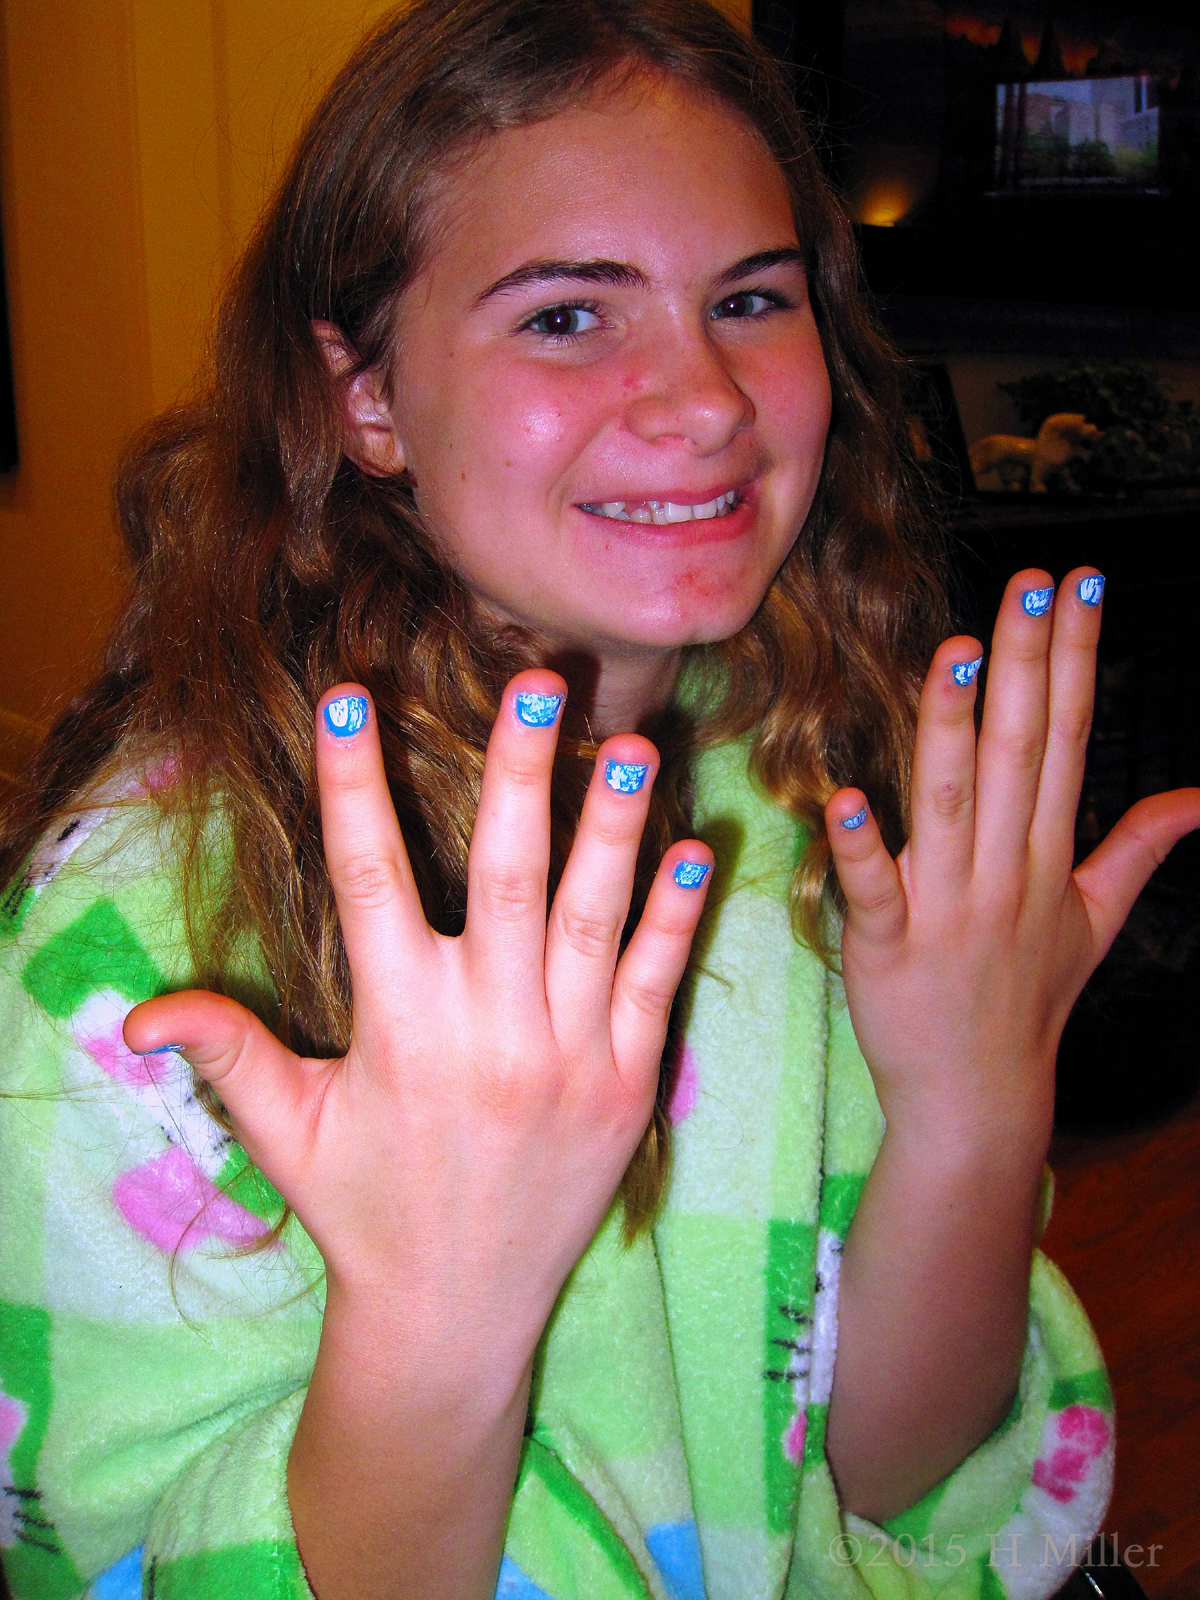 She Chose Blue Polish And White Shatter For Her Kids Manicure 